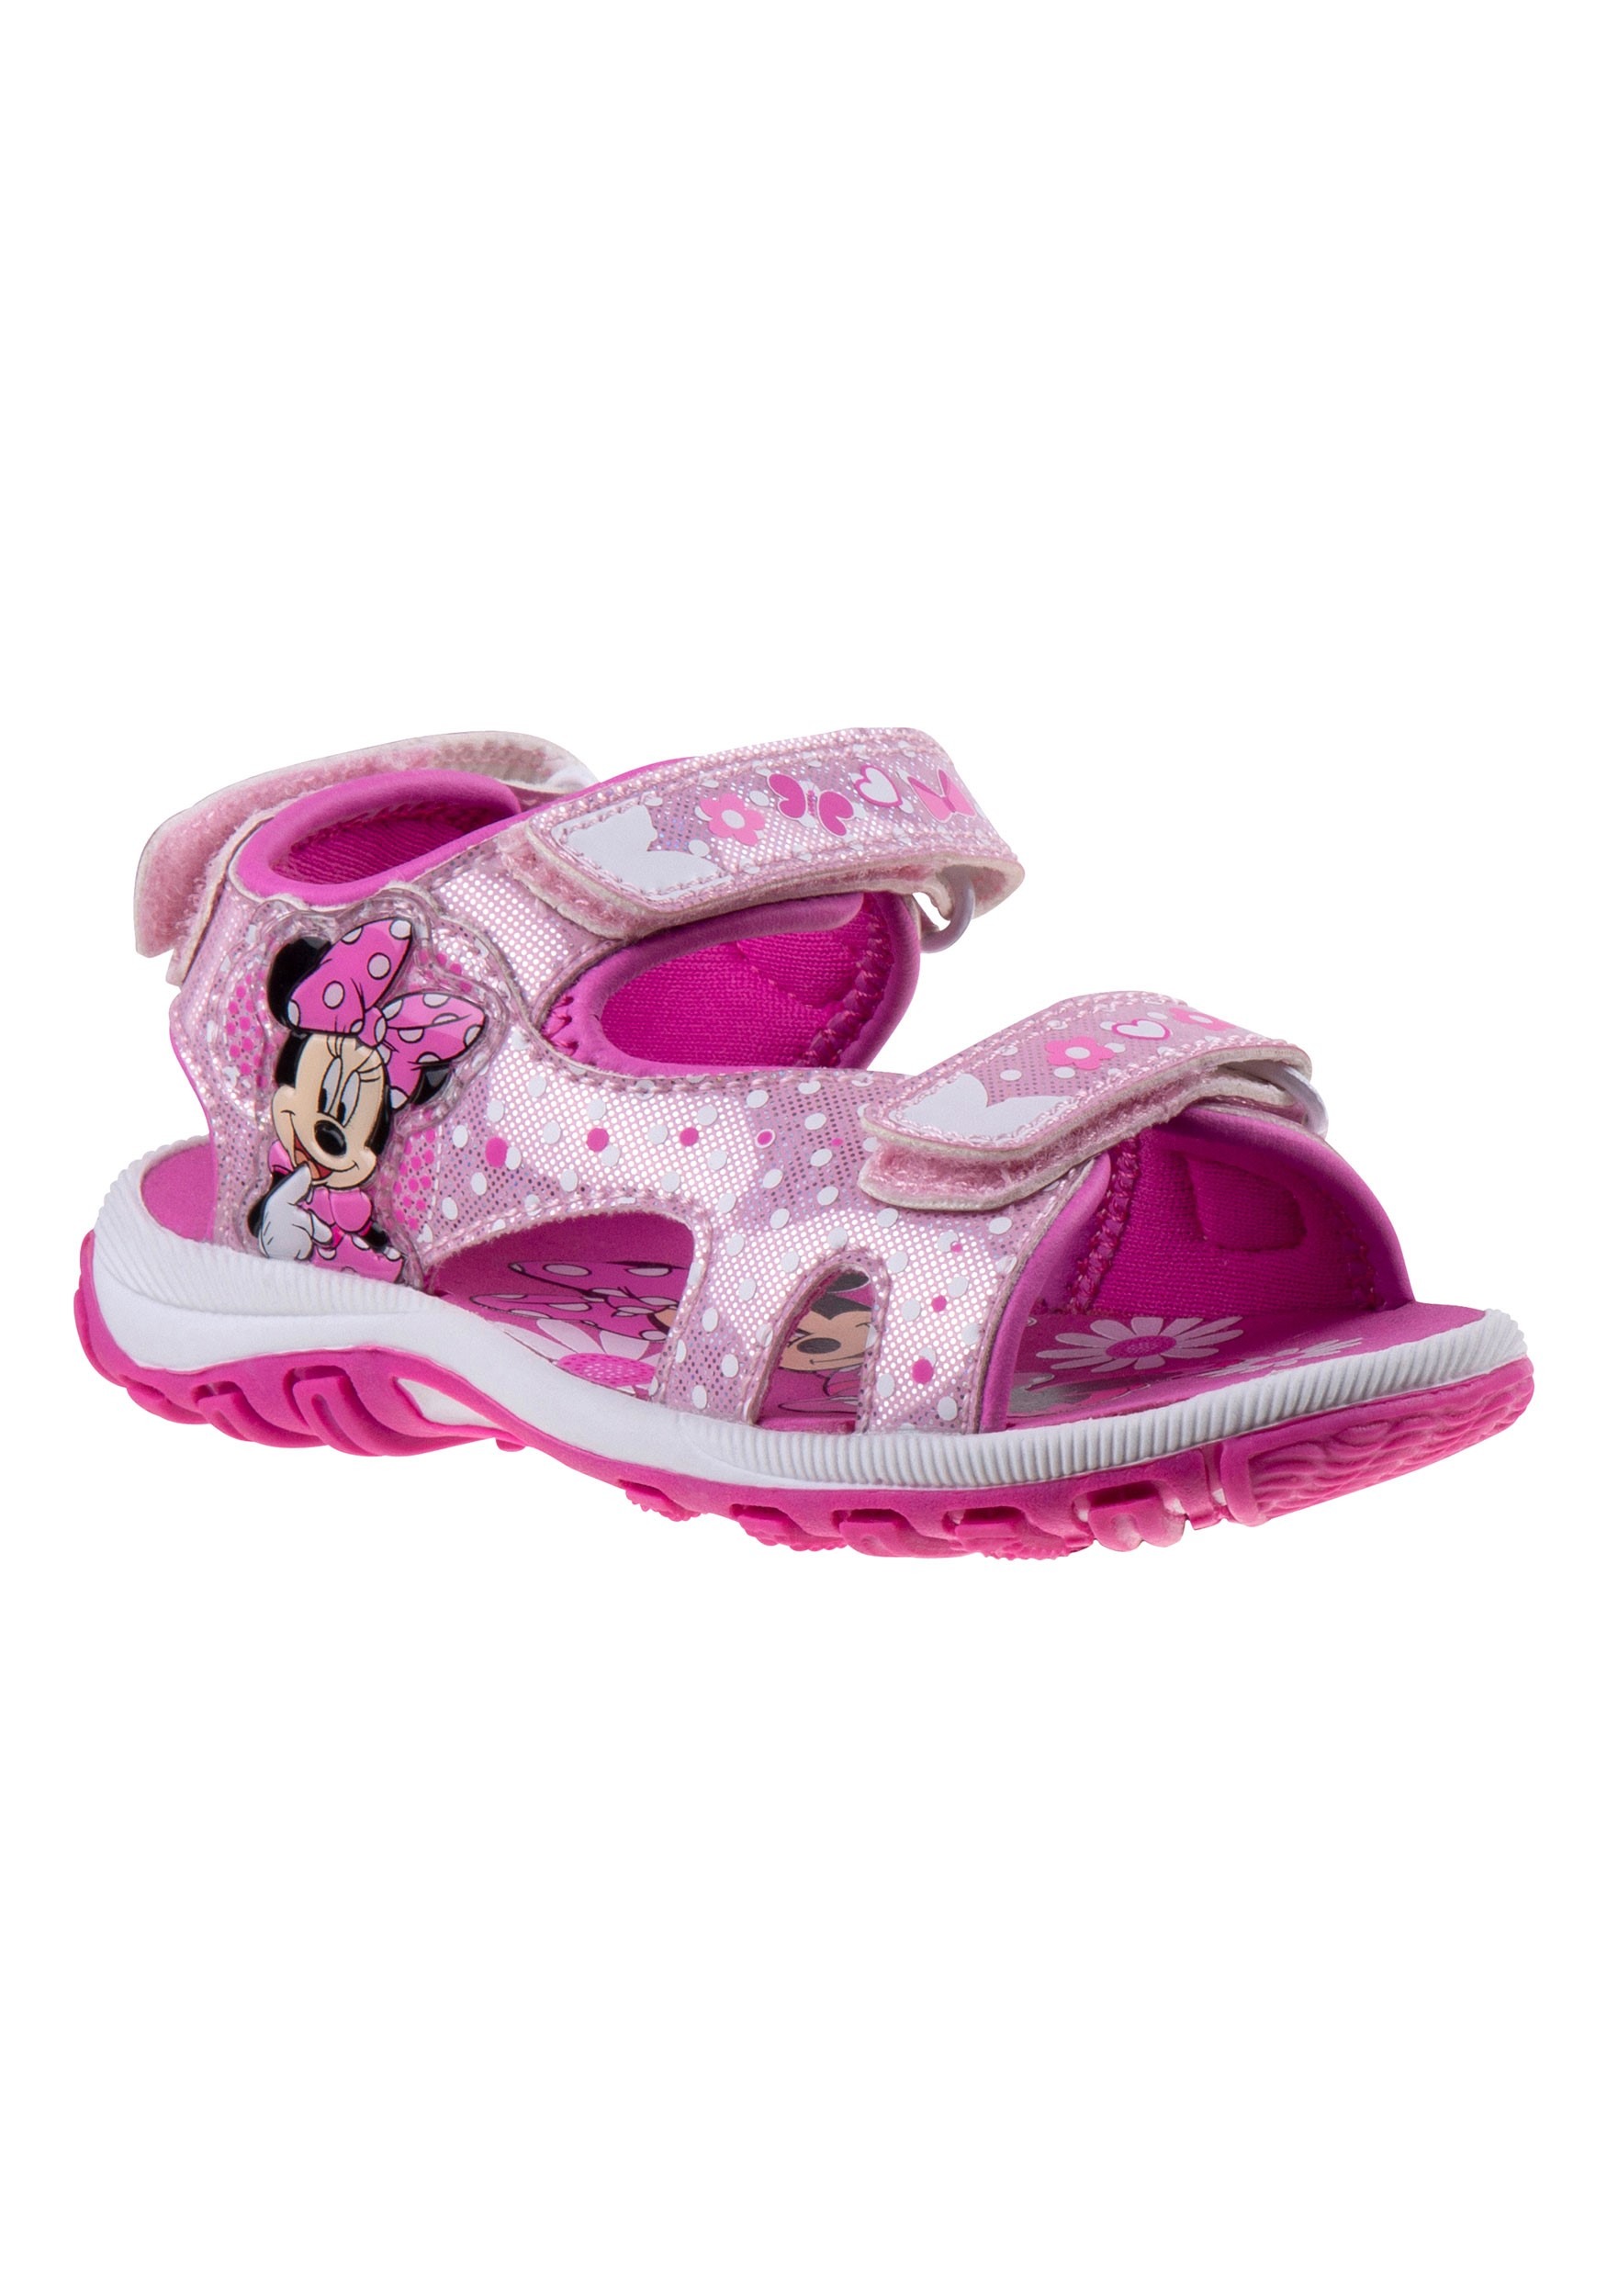 minnie mouse childrens shoes